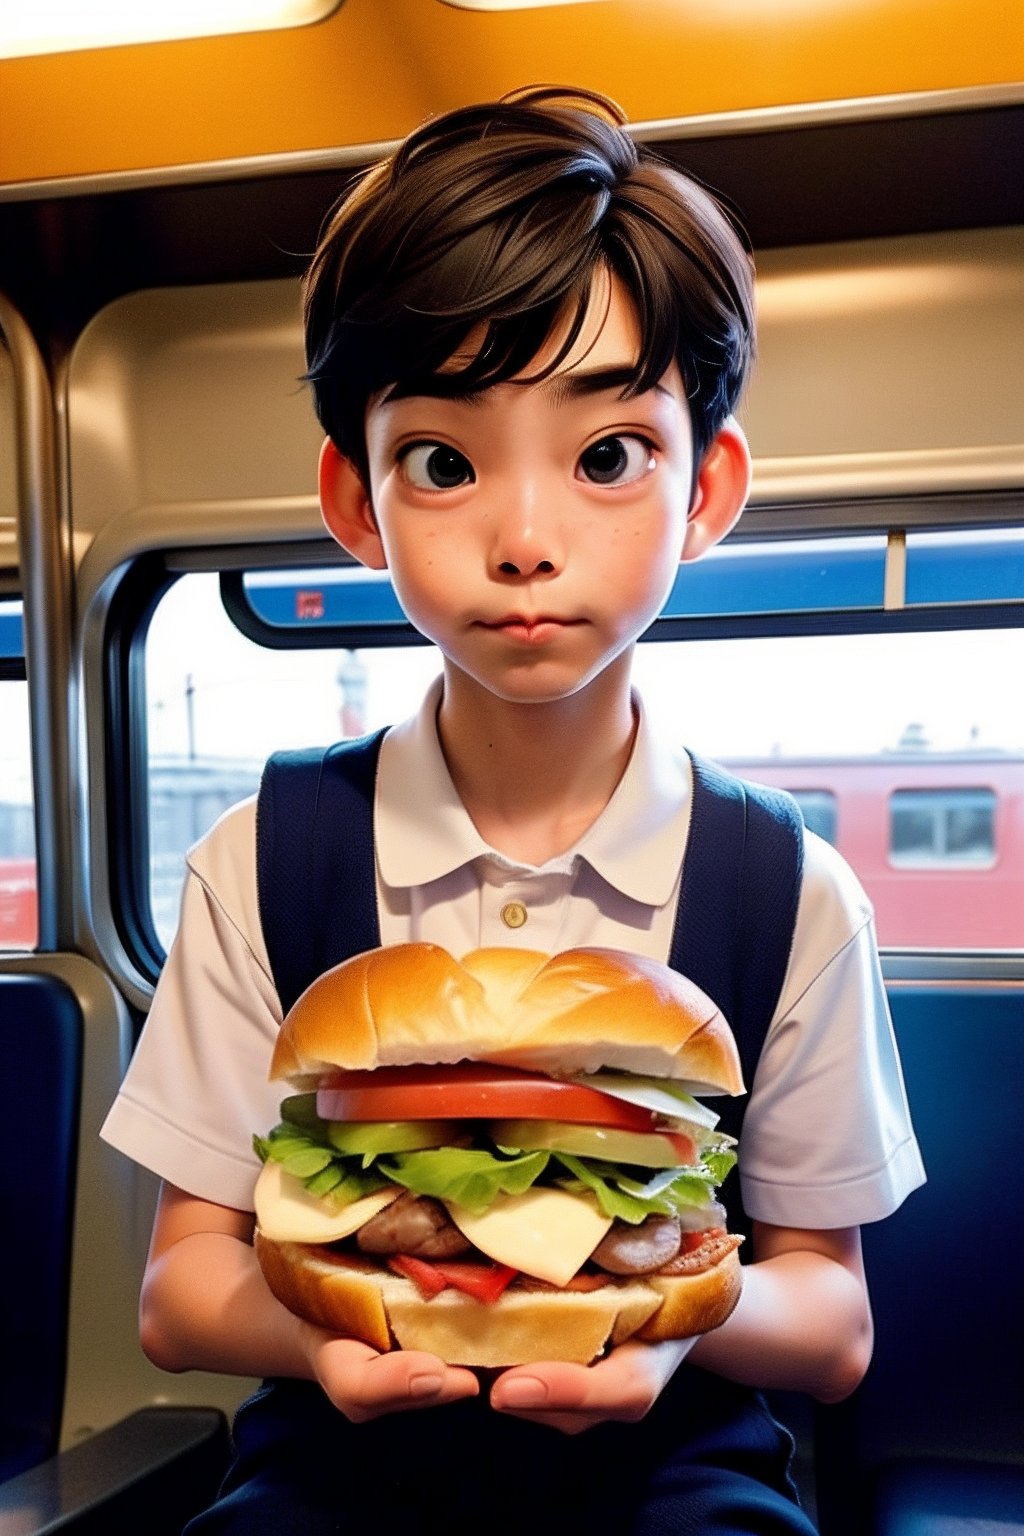 A boy is eating sandwitch in a train, day light, japan.